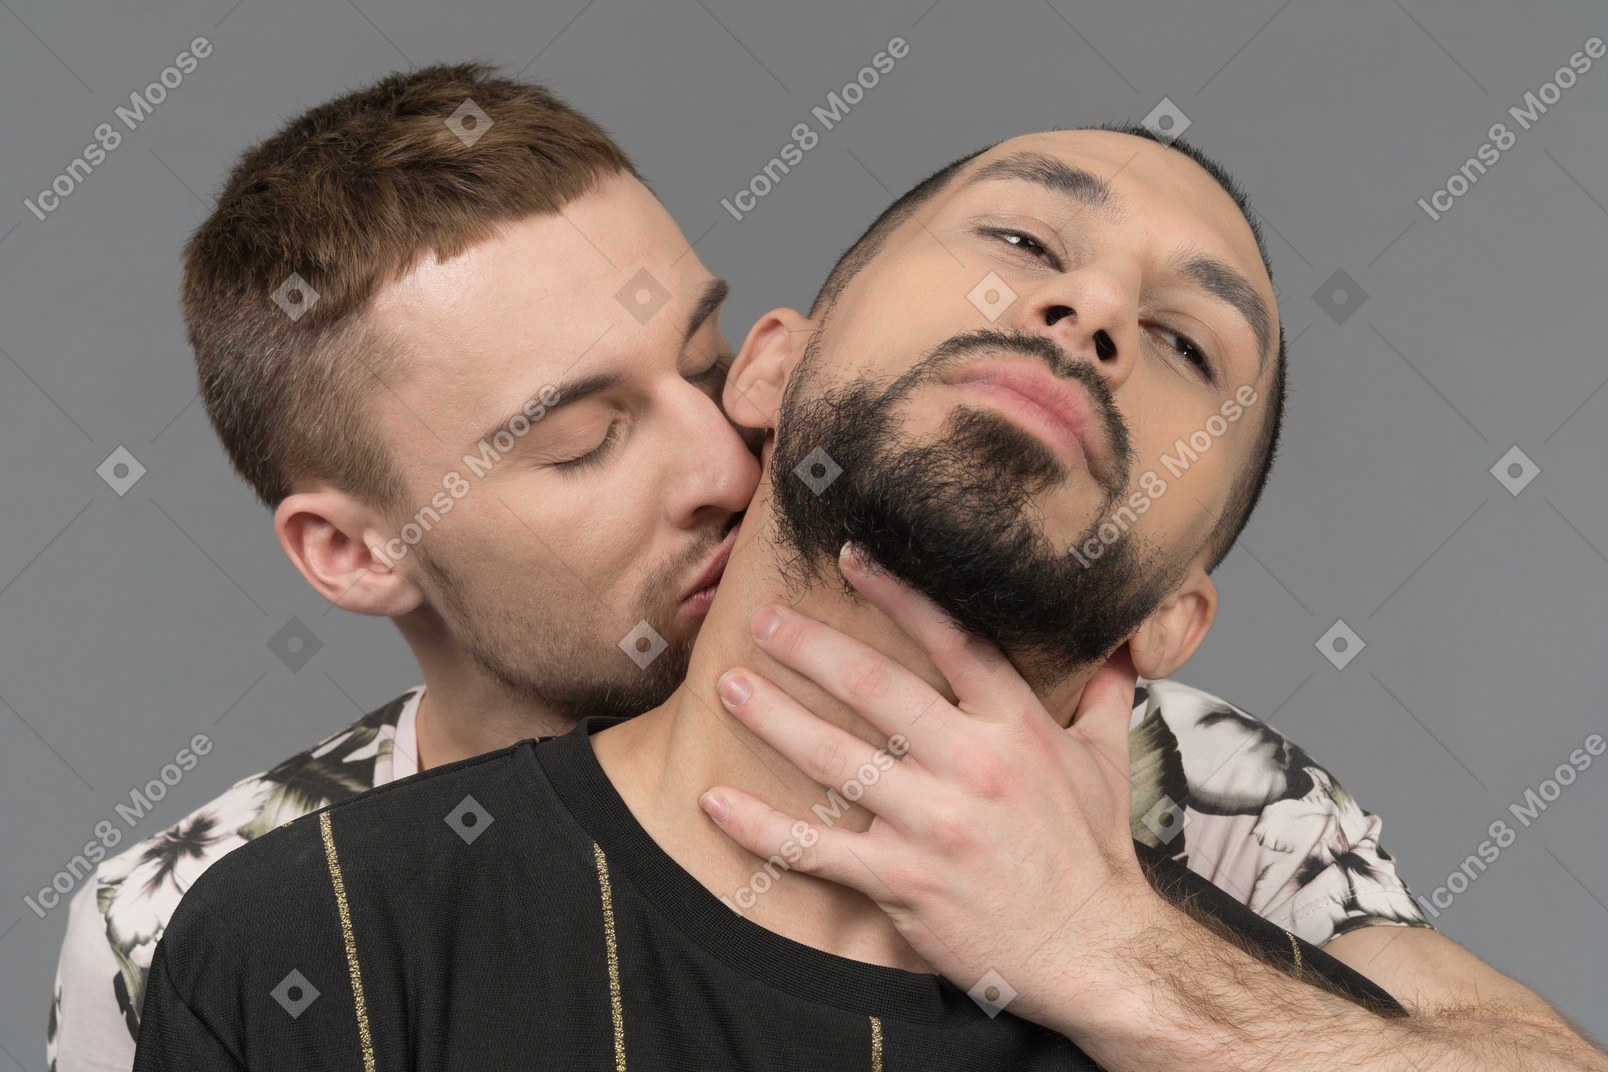 Young man passionately kissing partner's neck